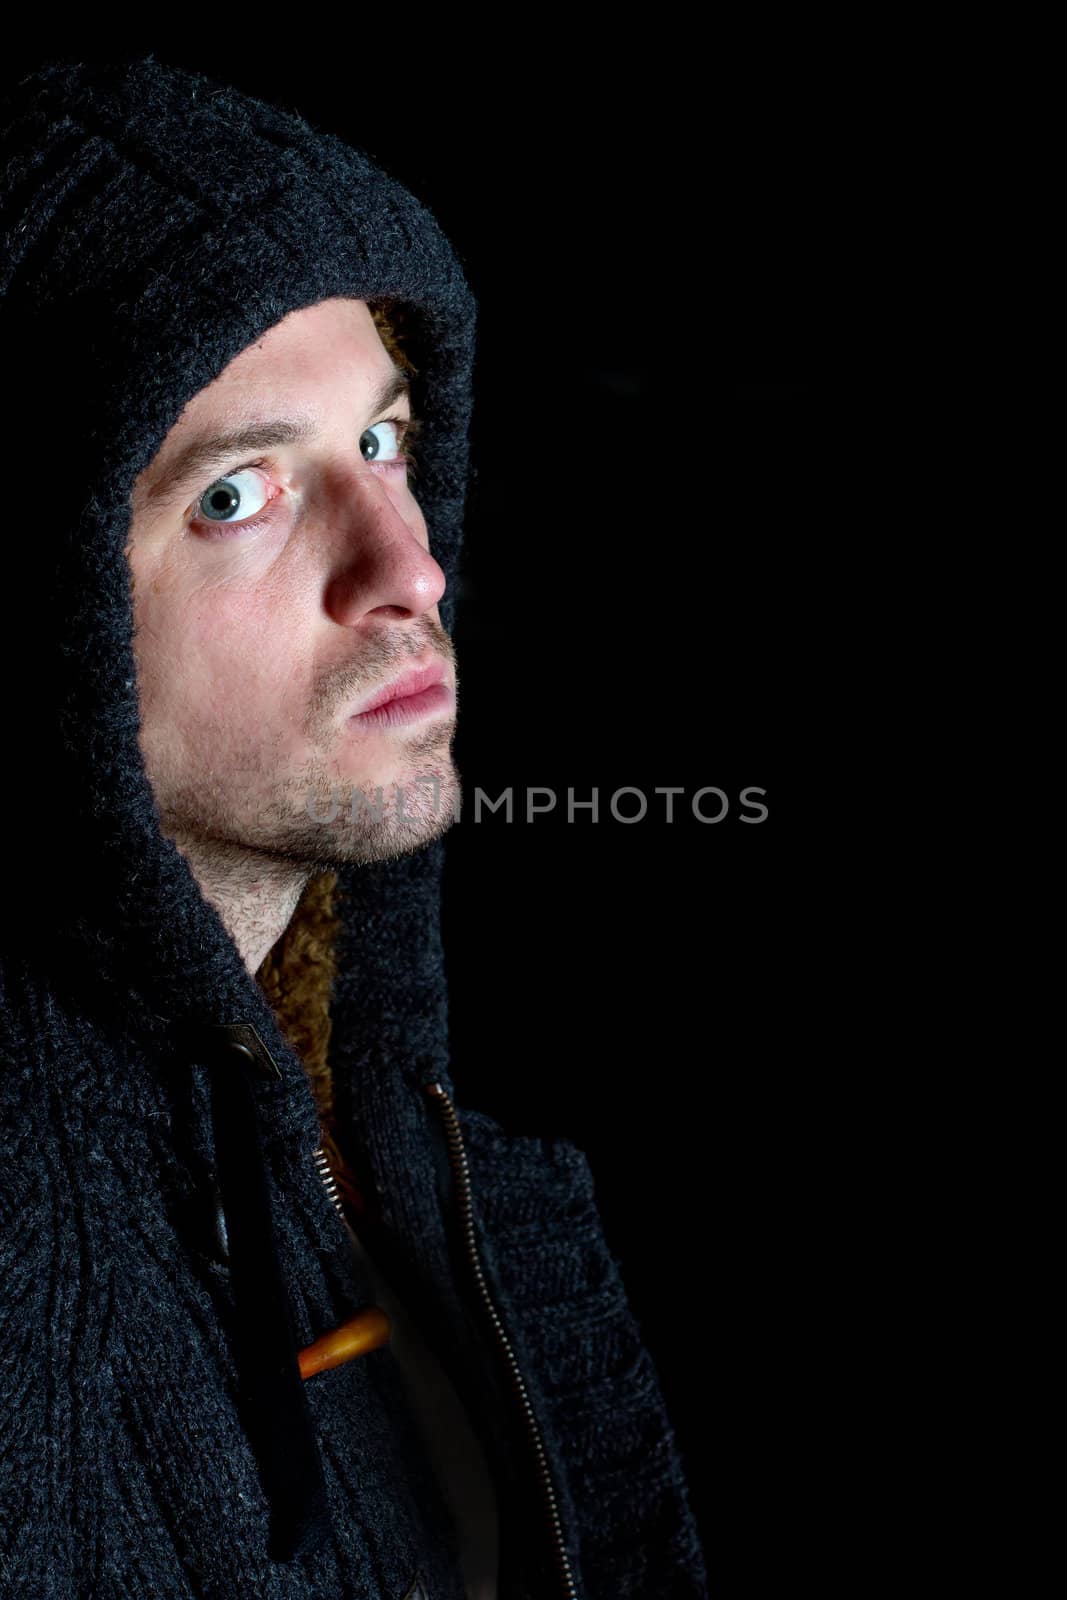 angry violent man with hood up staring